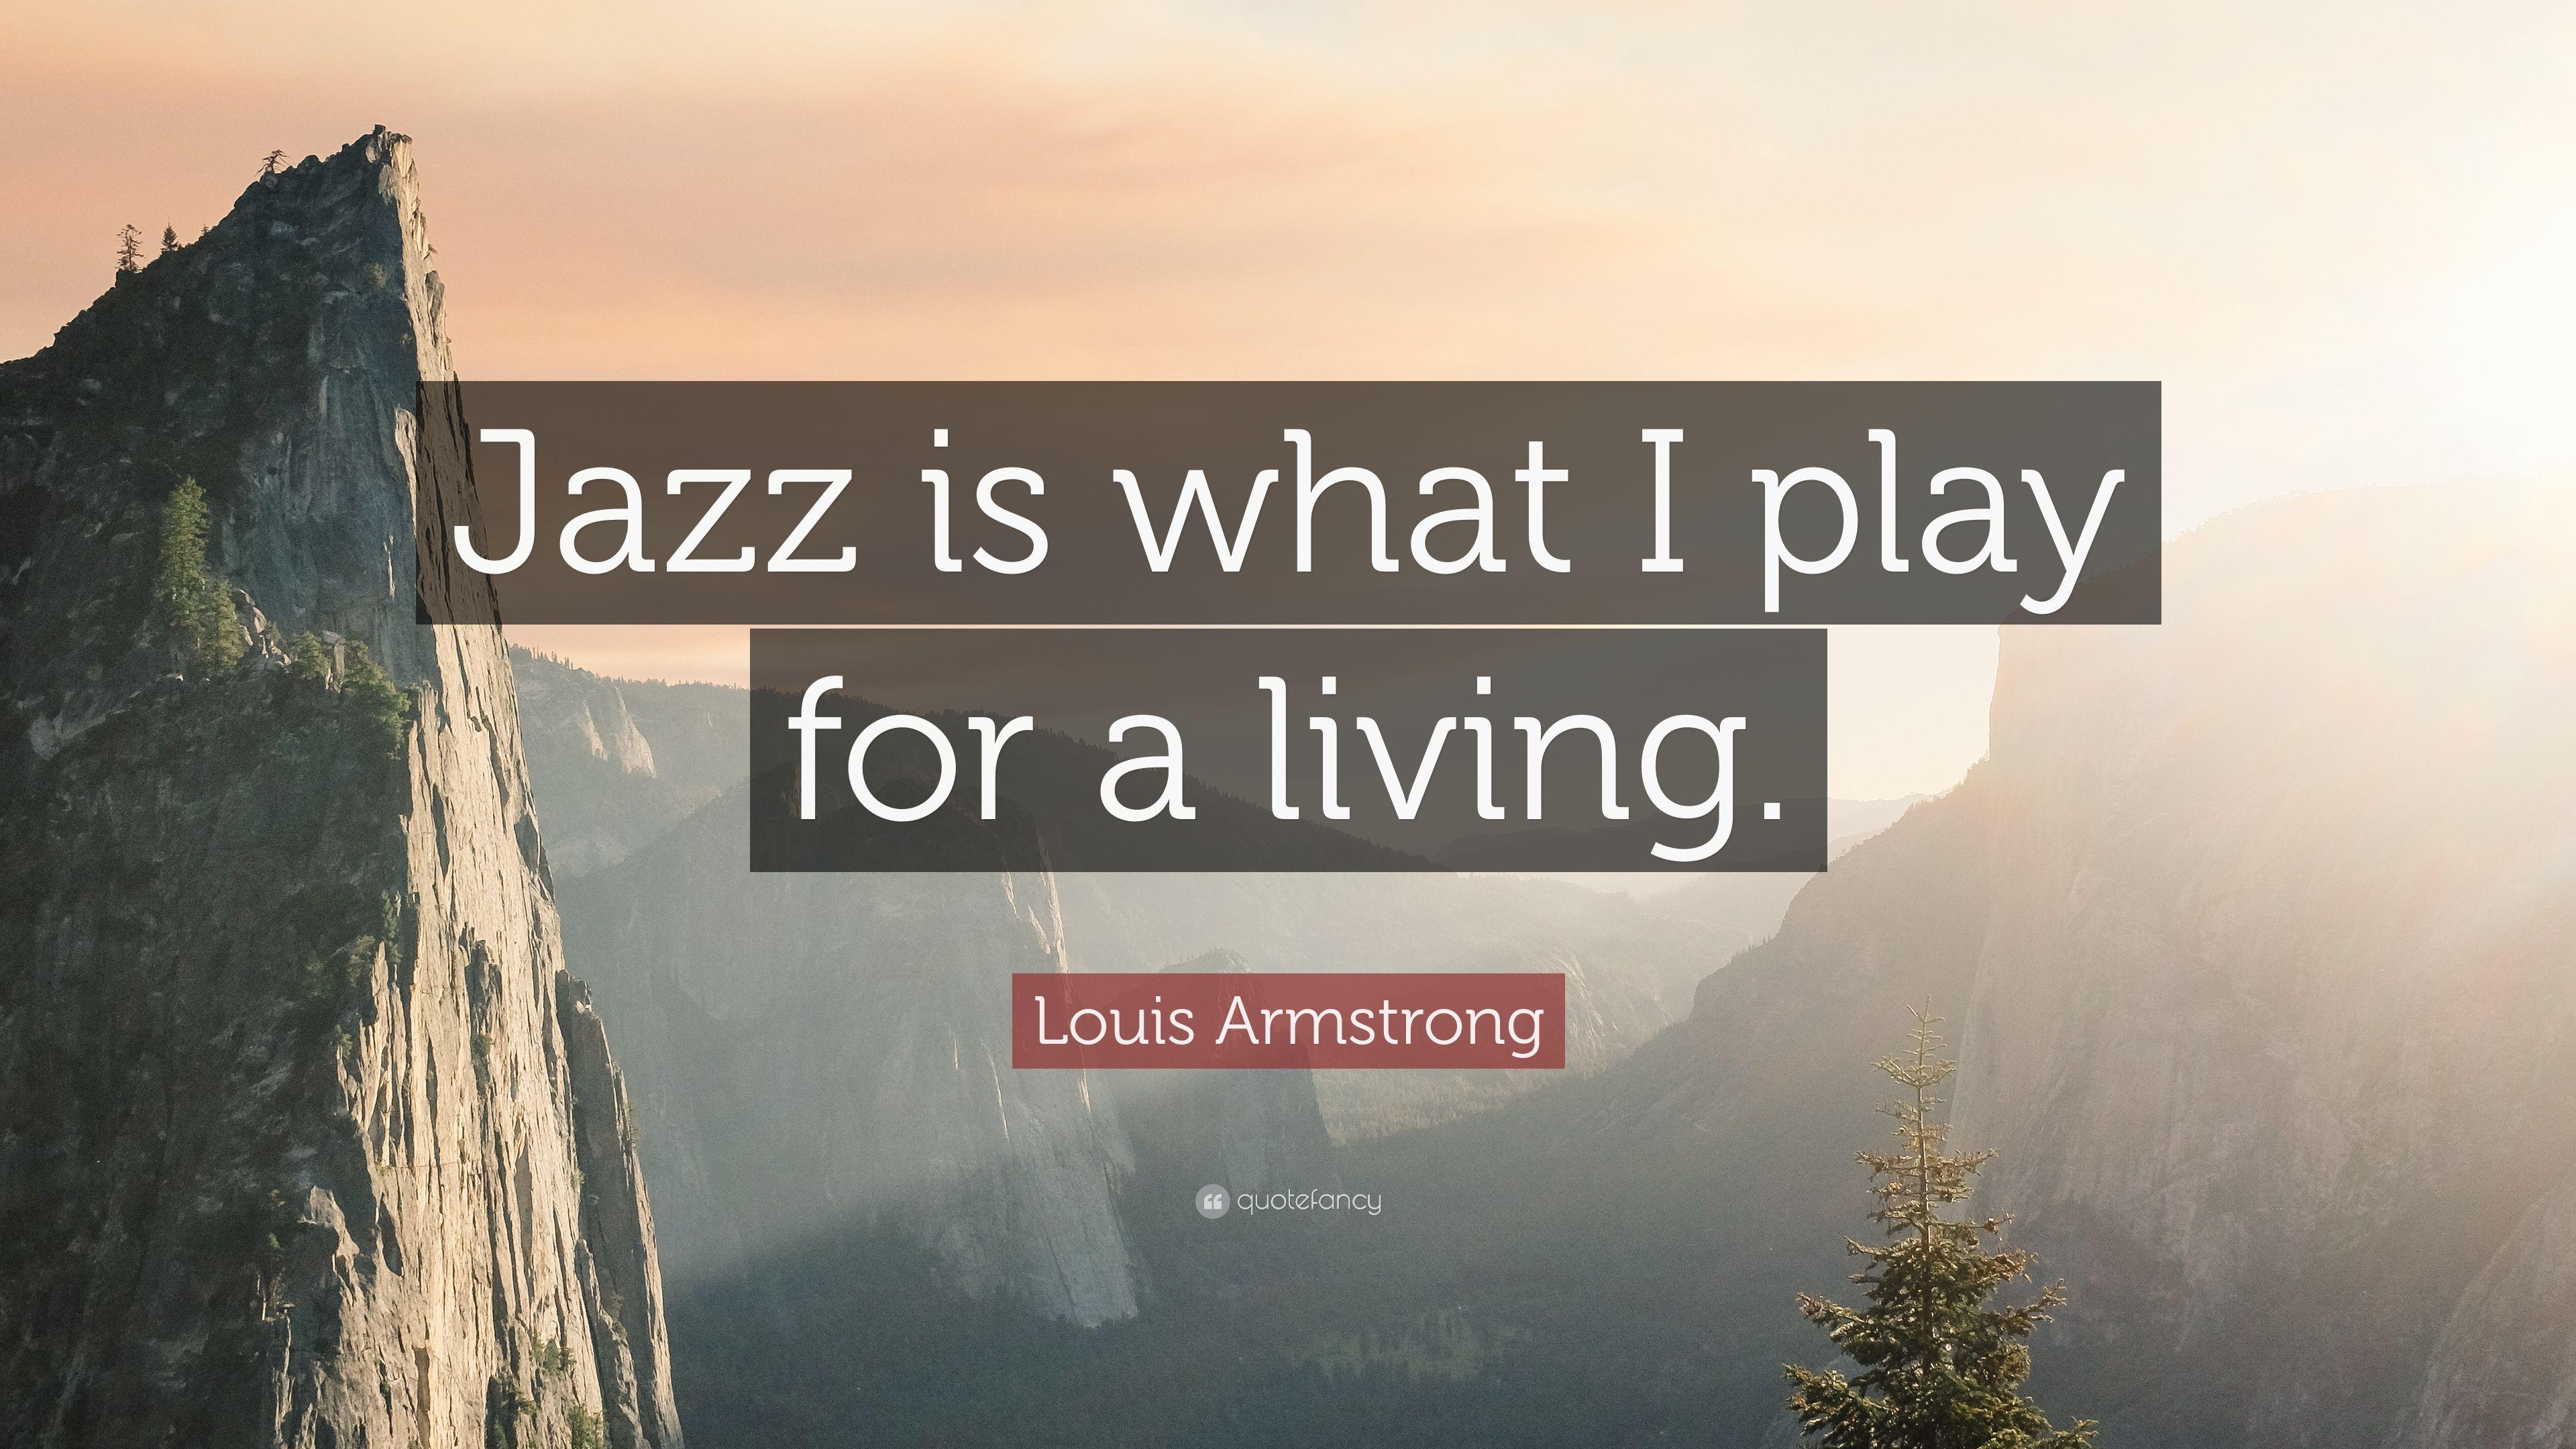 Louis Armstrong Quote: “Jazz is what I play for a living.” 9